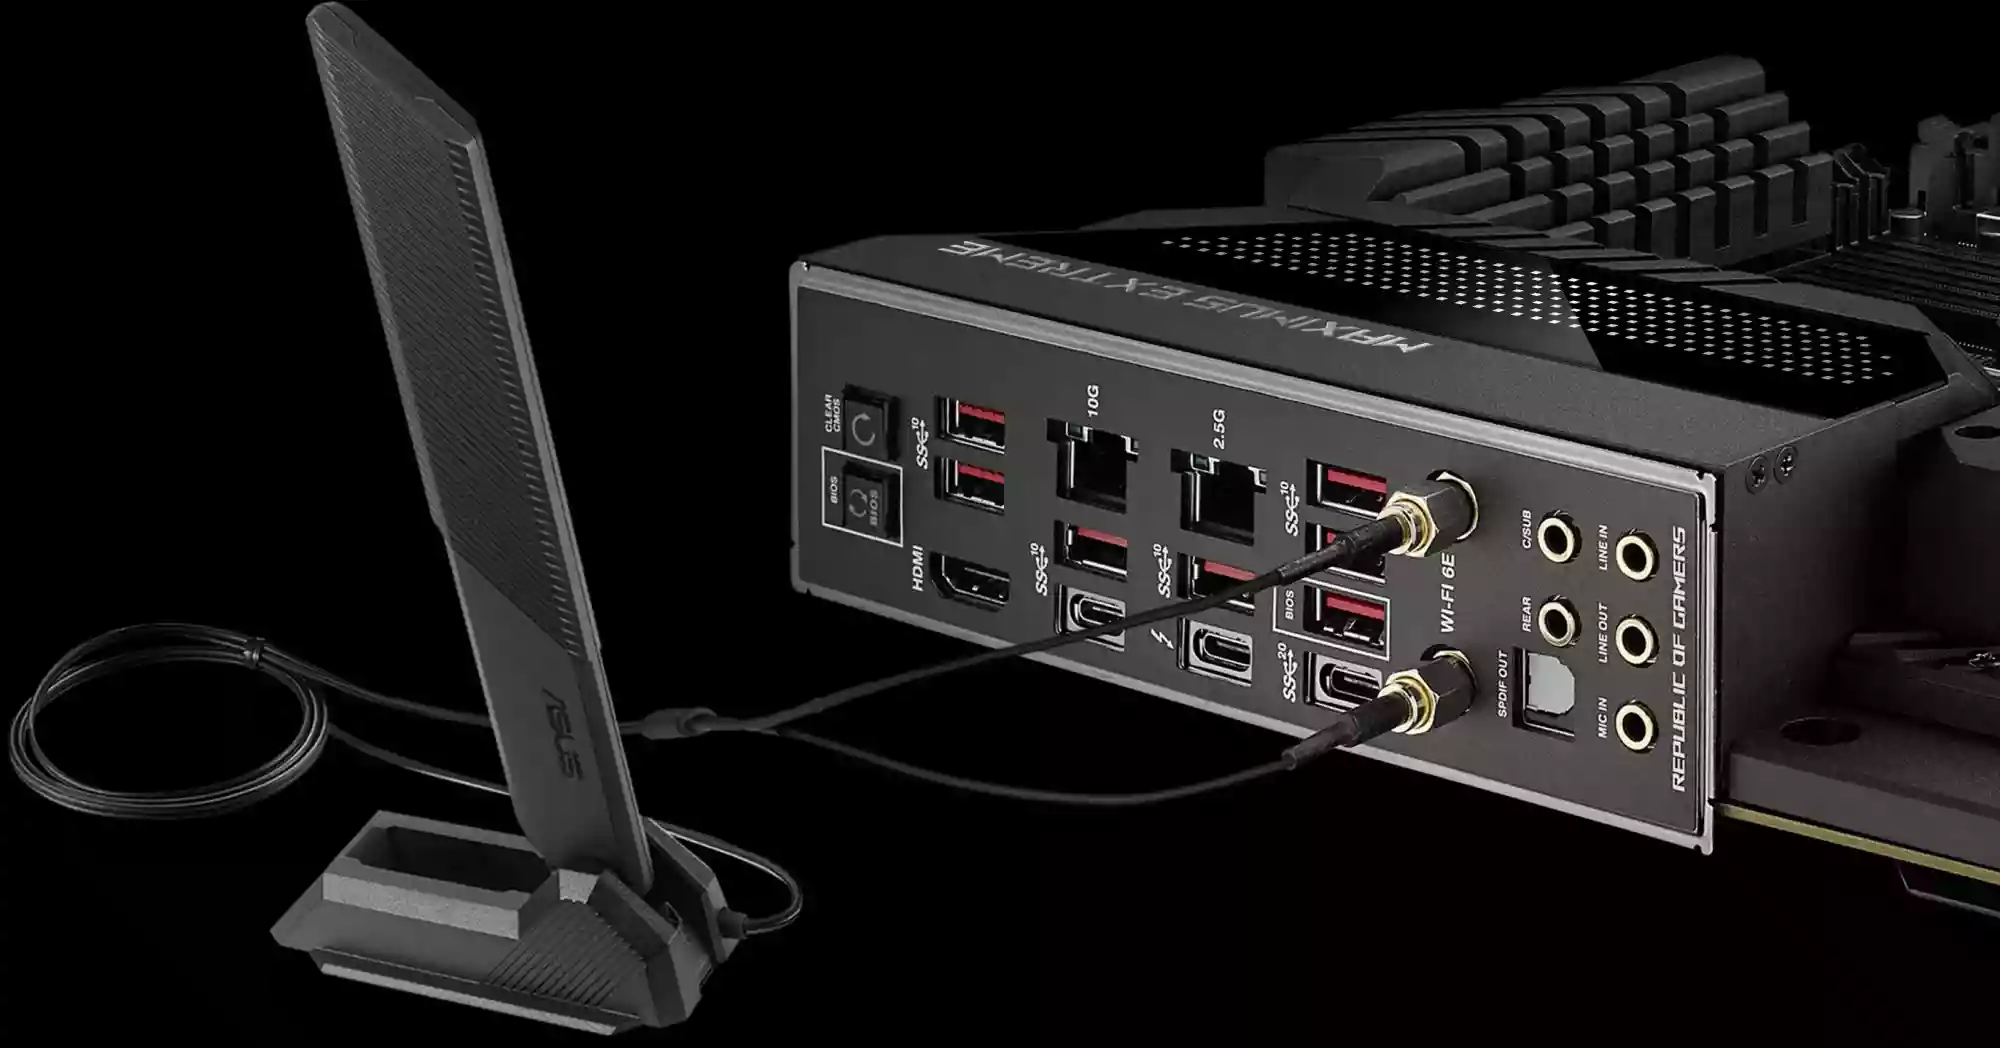 The rear I/O panel and WiFi antenna for the ROG Maximus Z790 Extreme motherboard